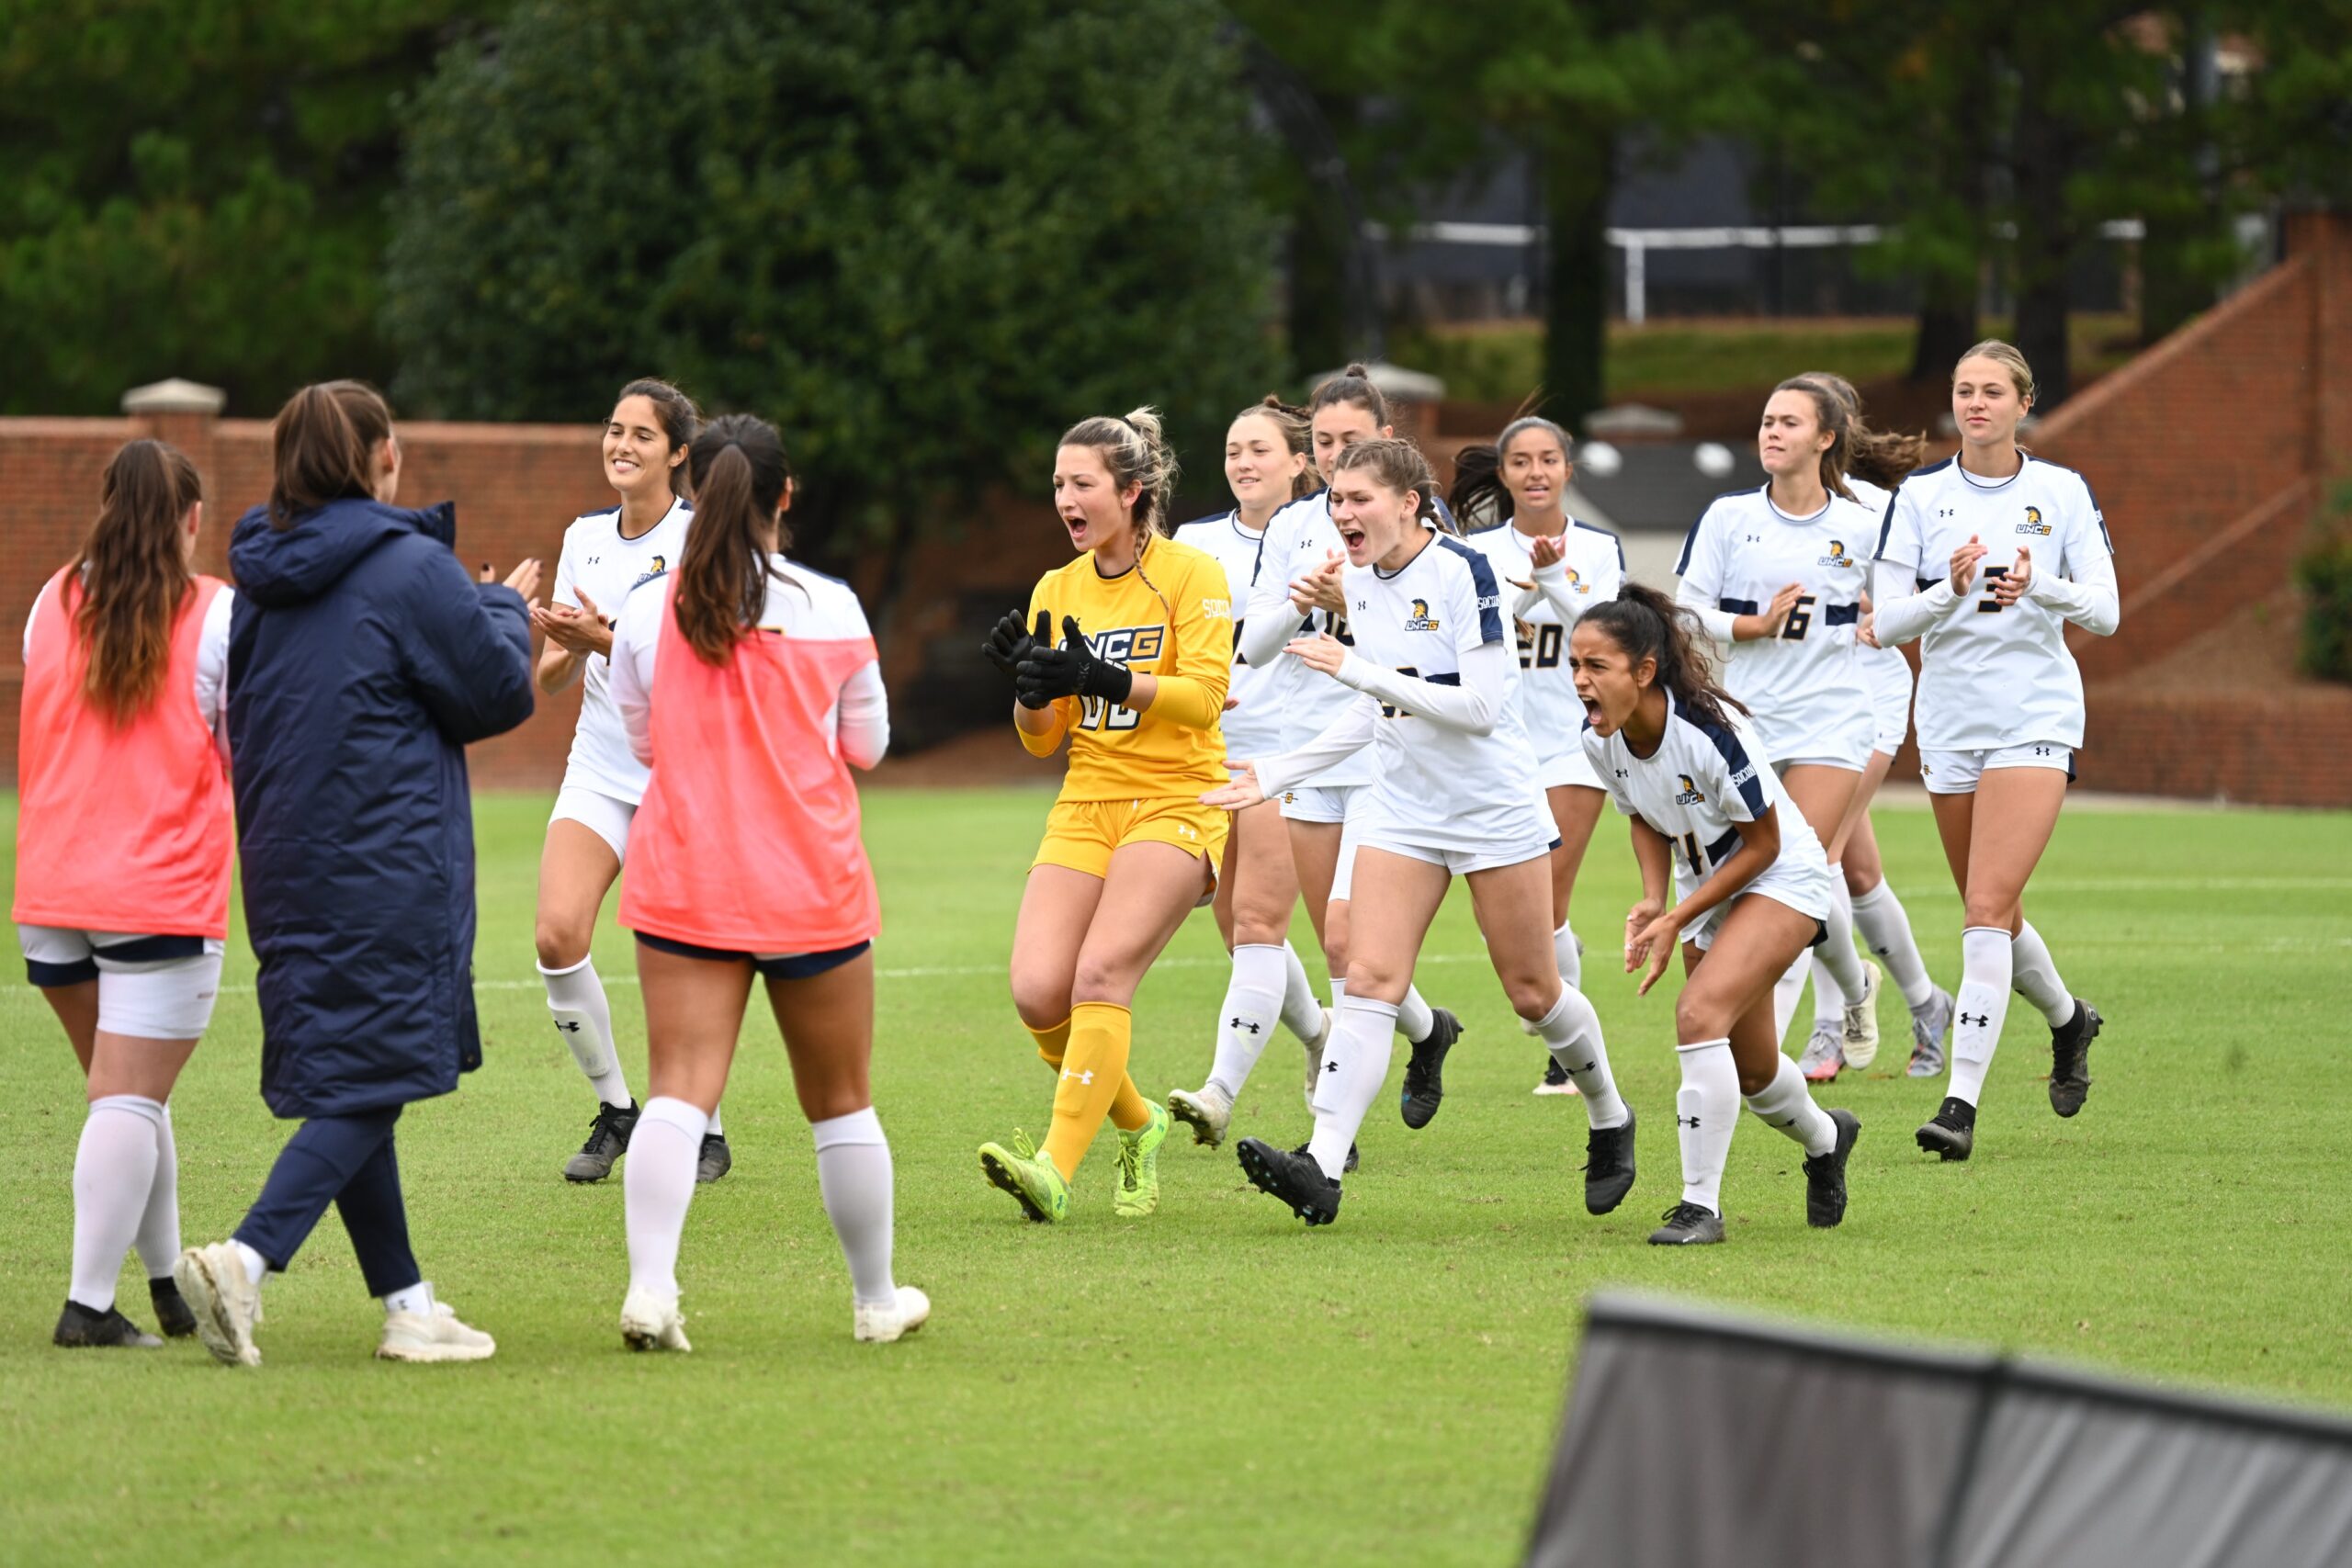 UNCG women's soccer players clap and smile as they run across the field.